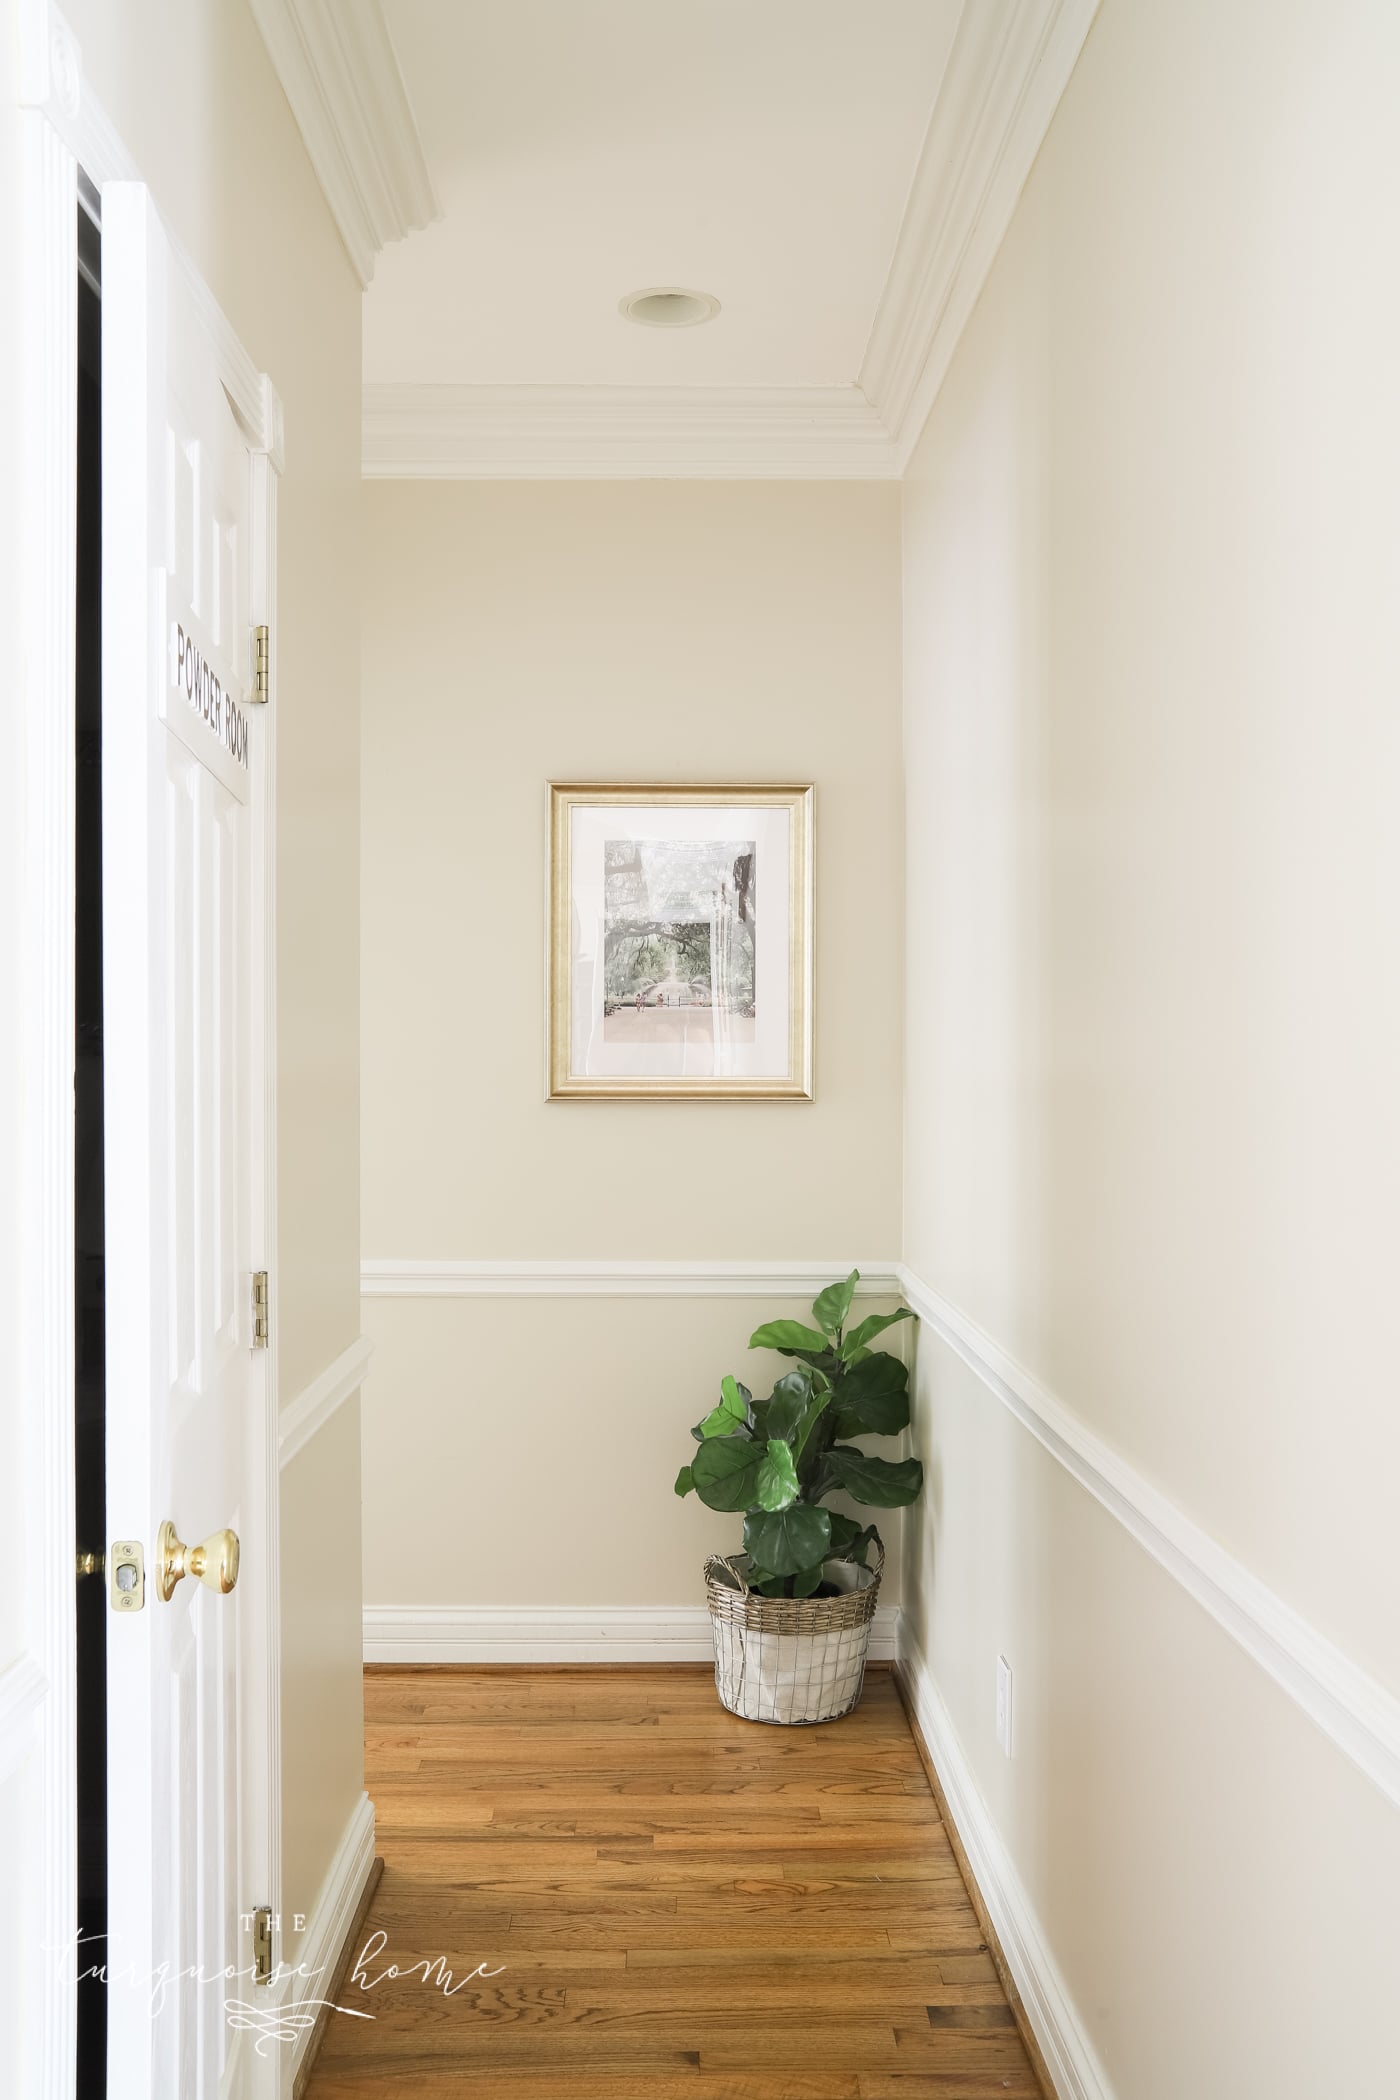 Top 9 Welcoming Ways to Decorate a Long Entry Hallway - Start at Home Decor